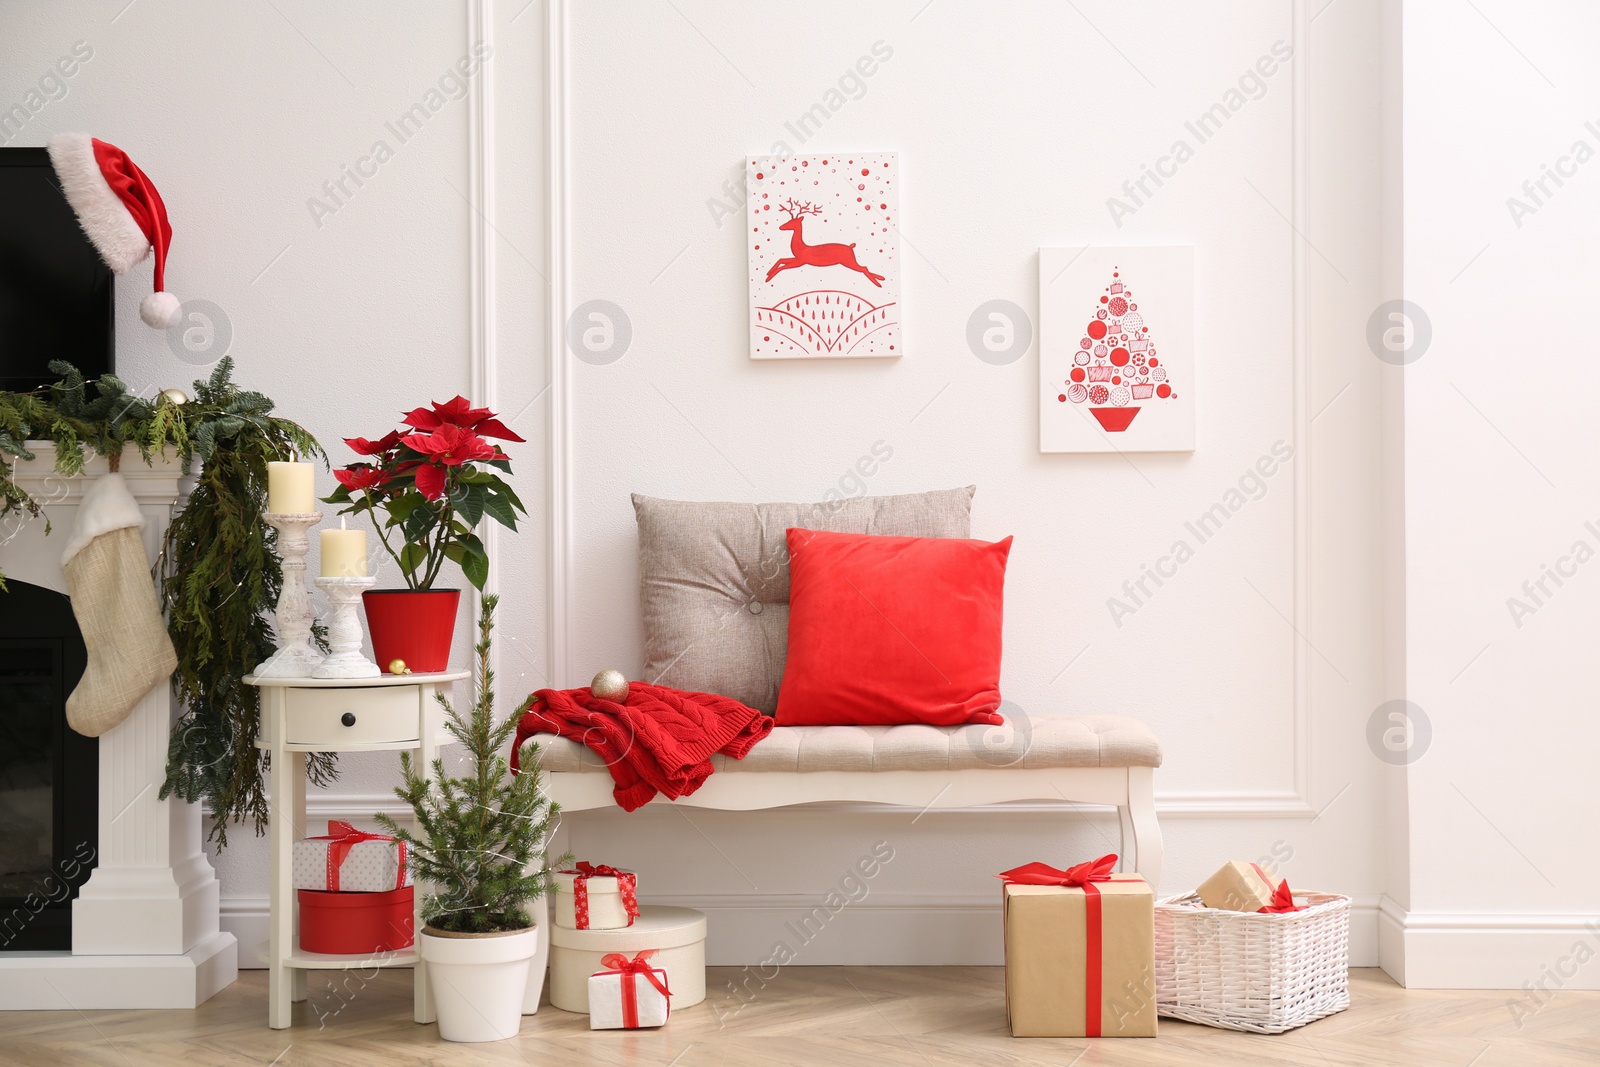 Photo of Living room interior with Christmas themed pictures